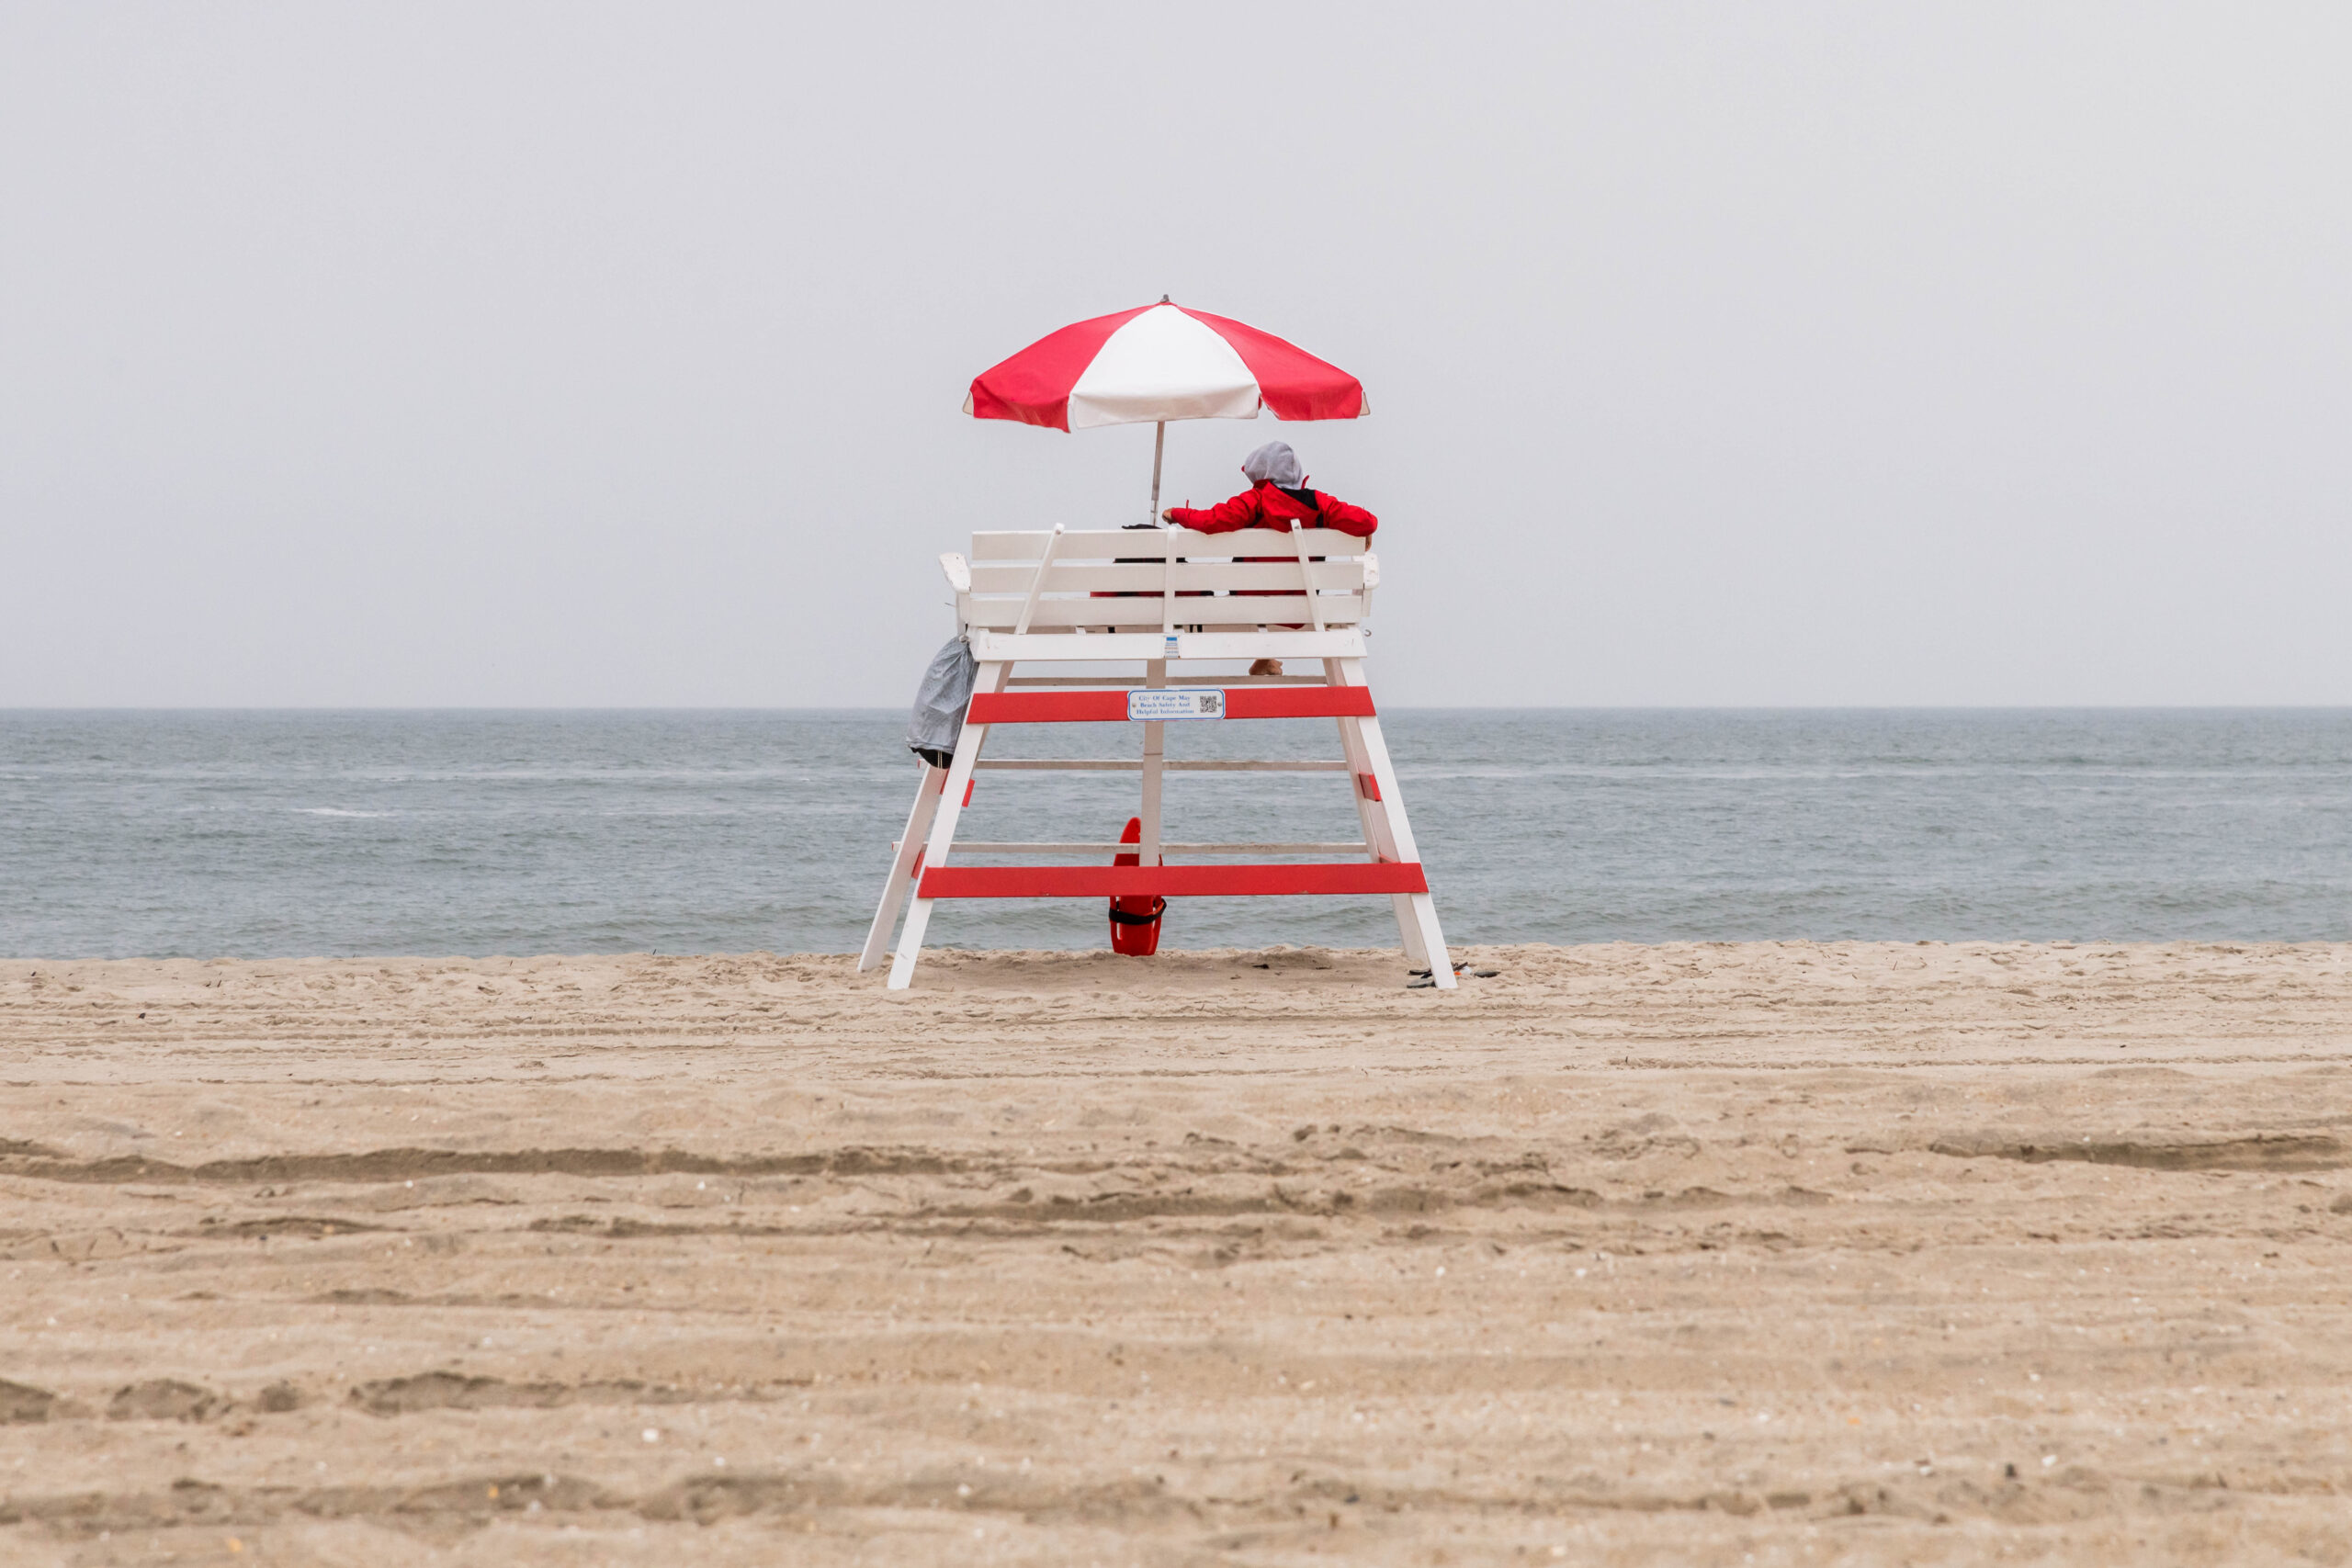 A lifeguard wearing a red jacket sitting on a red and white lifeguard stand under a red and white umbrella on the beach with a cloudy gray sky and gray sea